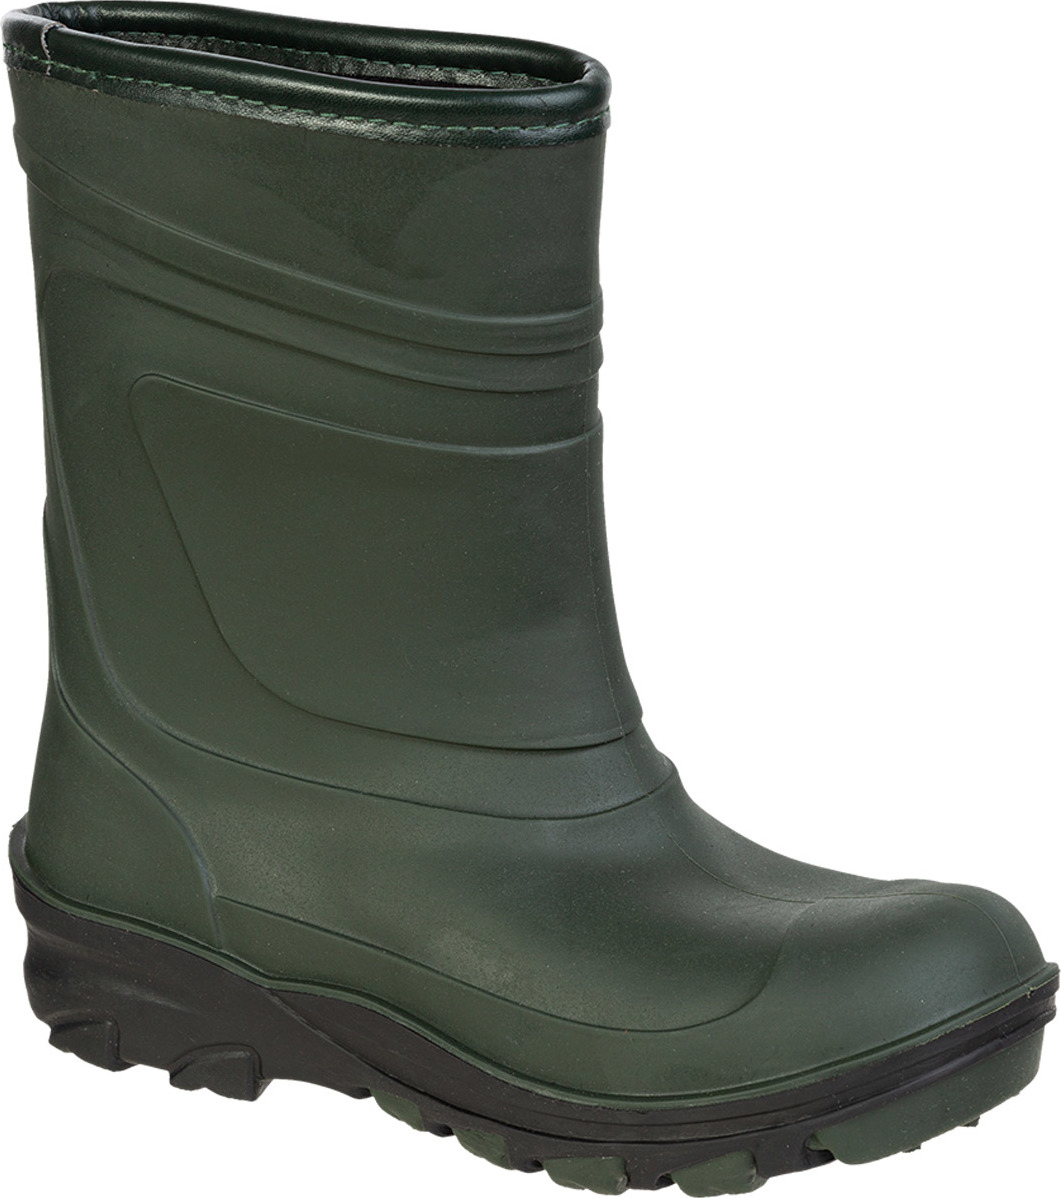 Black Boot Black | Kids\' here Kids\' | Buy FianThermo FianThermo Boot Outnorth